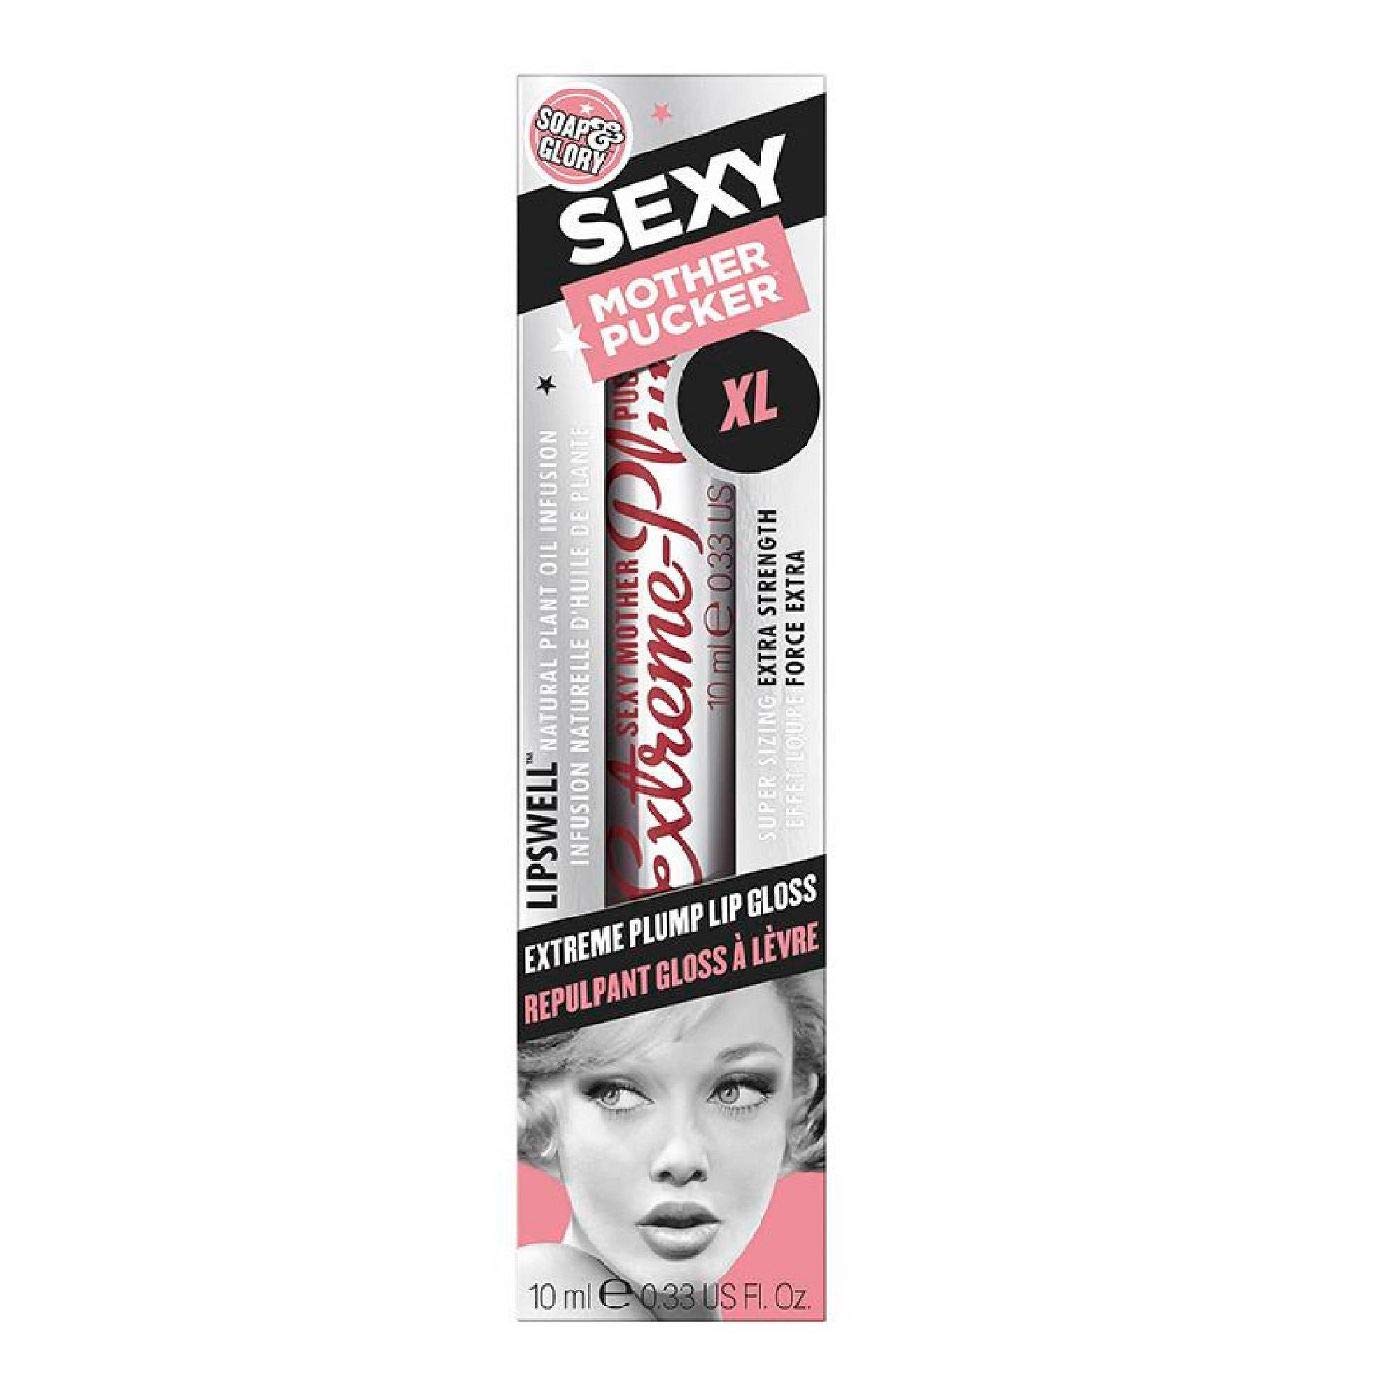 Soap And Glory Sexy Mother Pucker Xl Lip Plumping Gloss